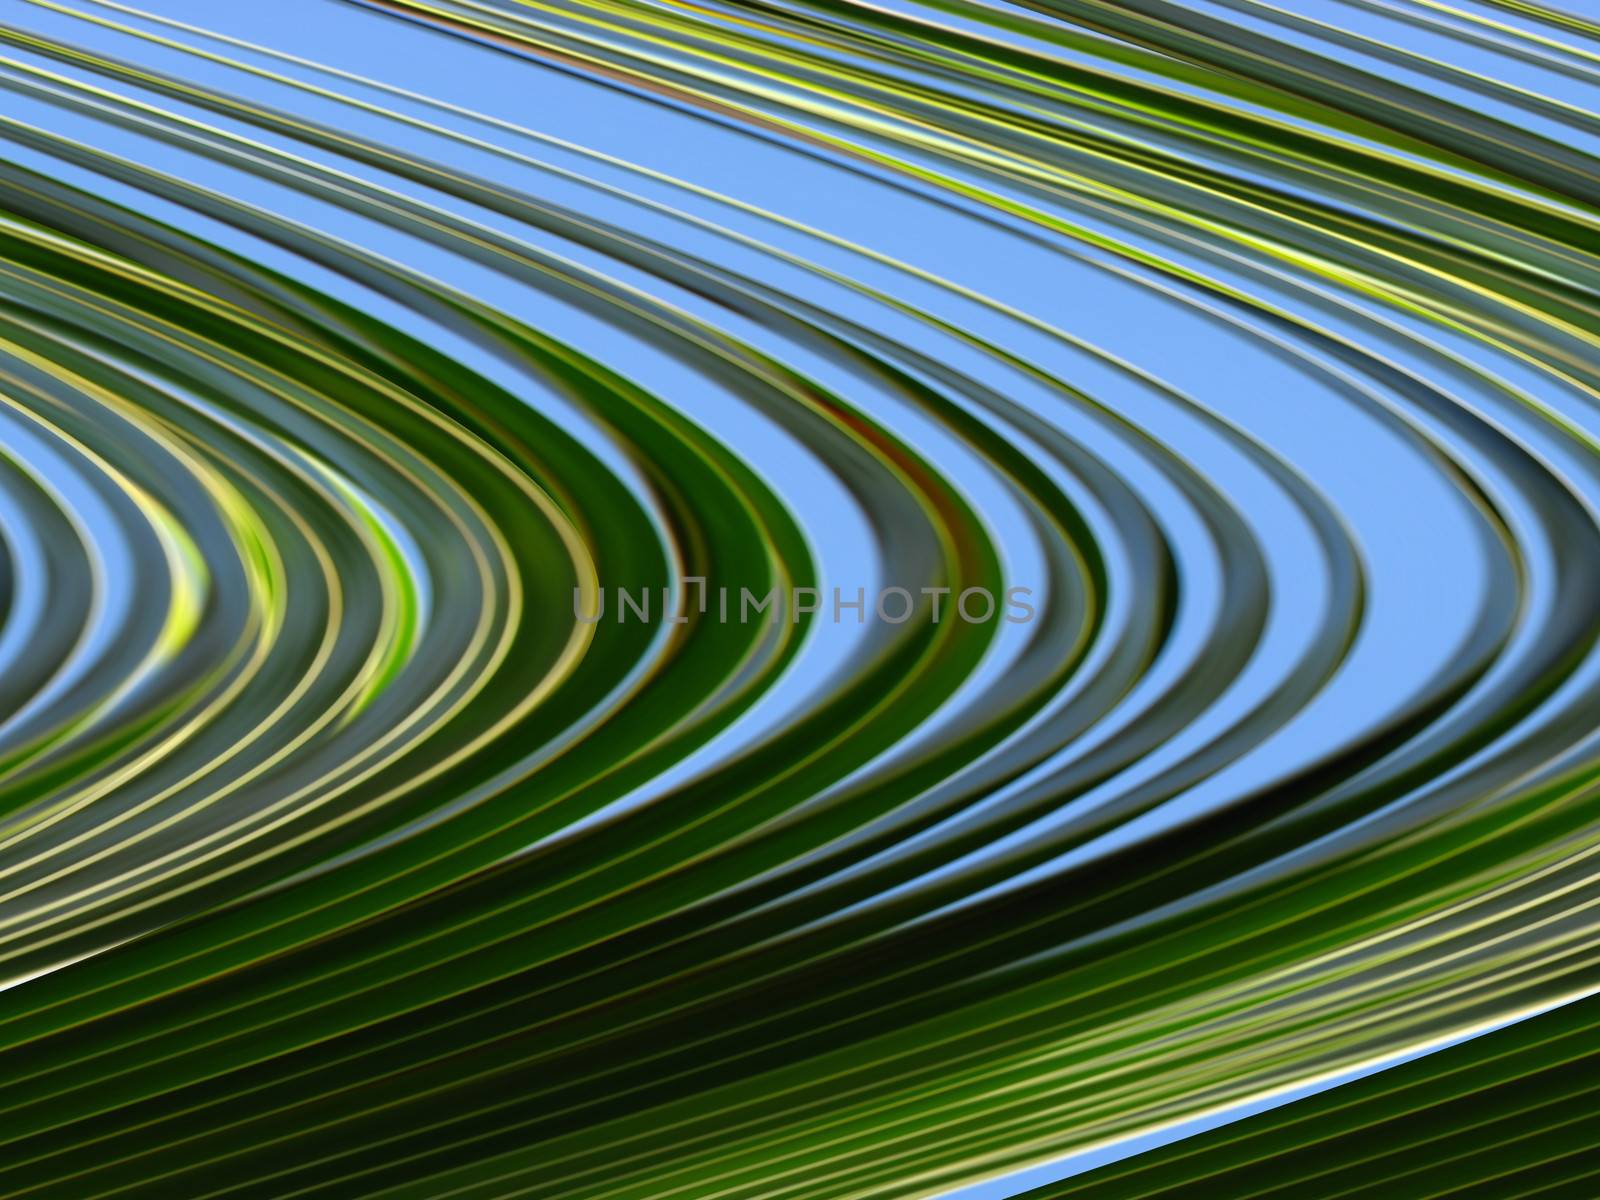 An abstract pattern of curvy palm leaves on a blue background.